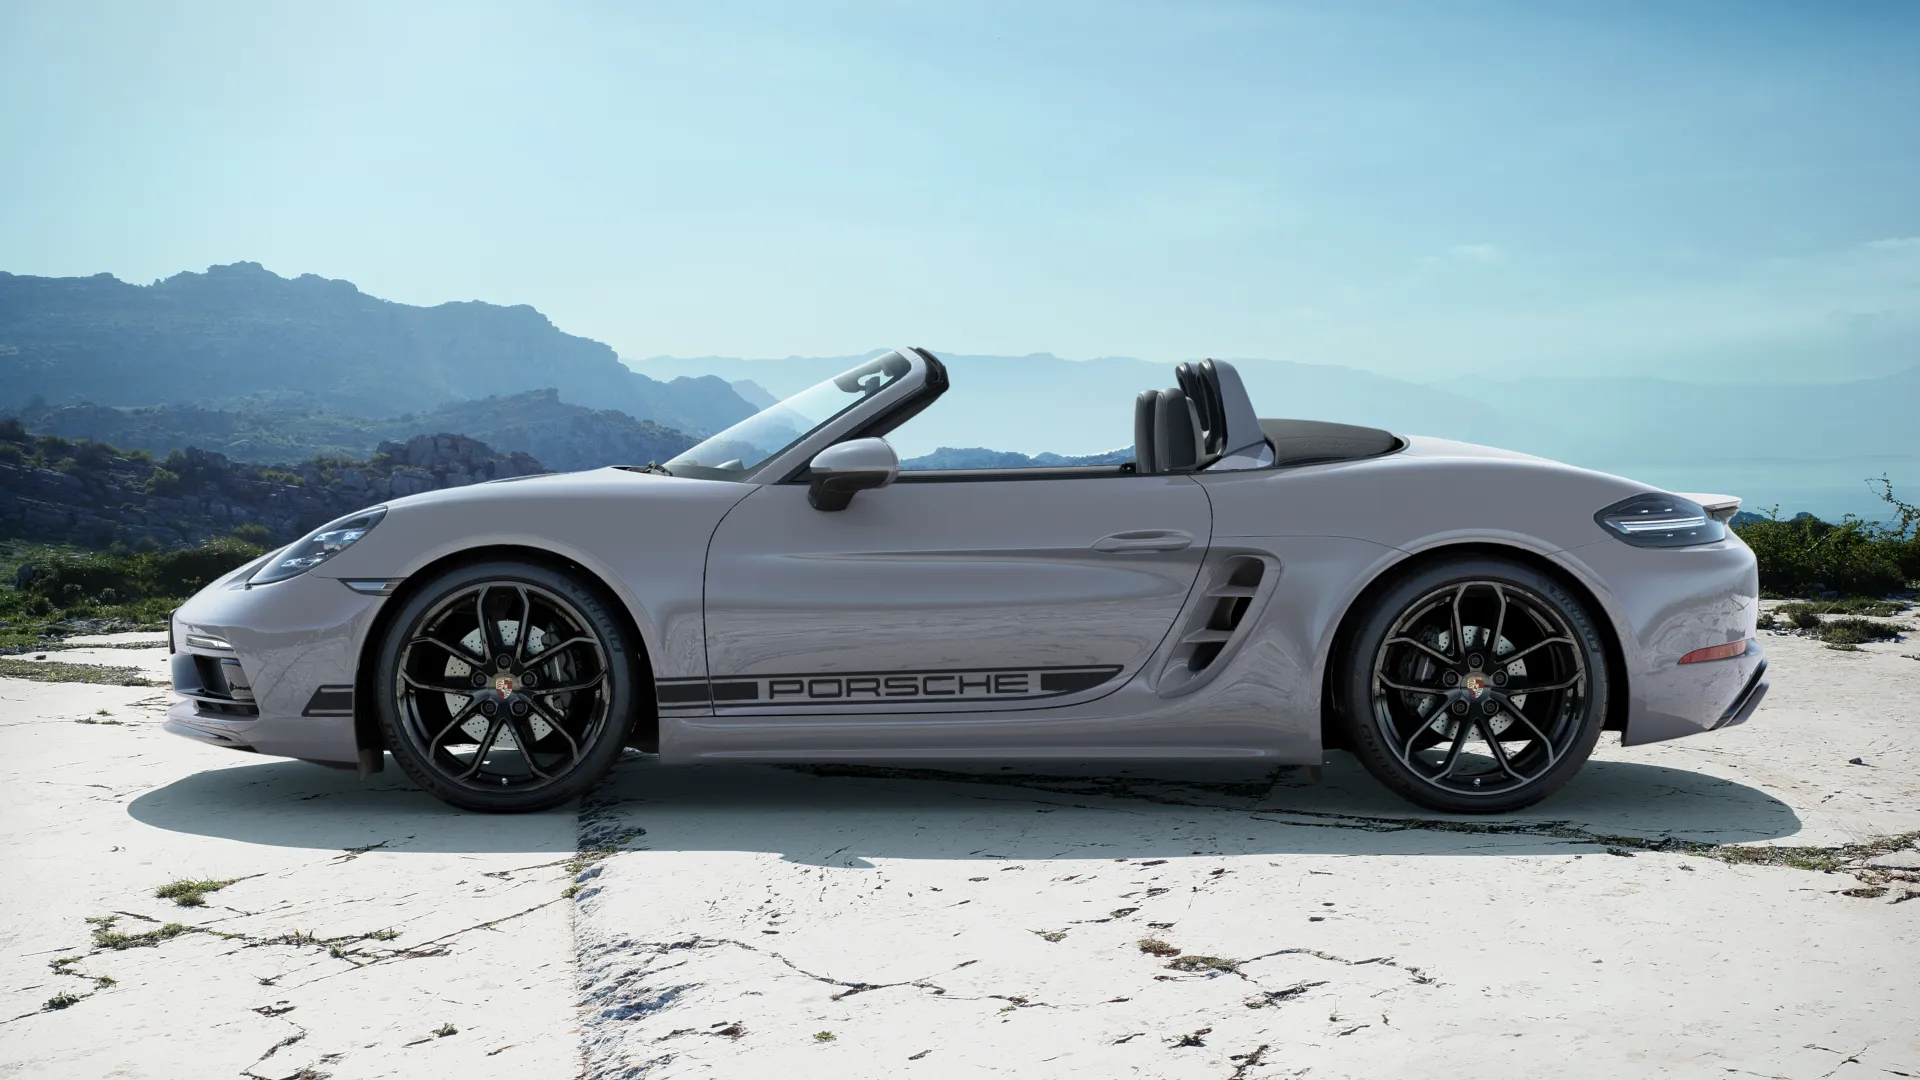 Exterior view of 718 Boxster Style Edition